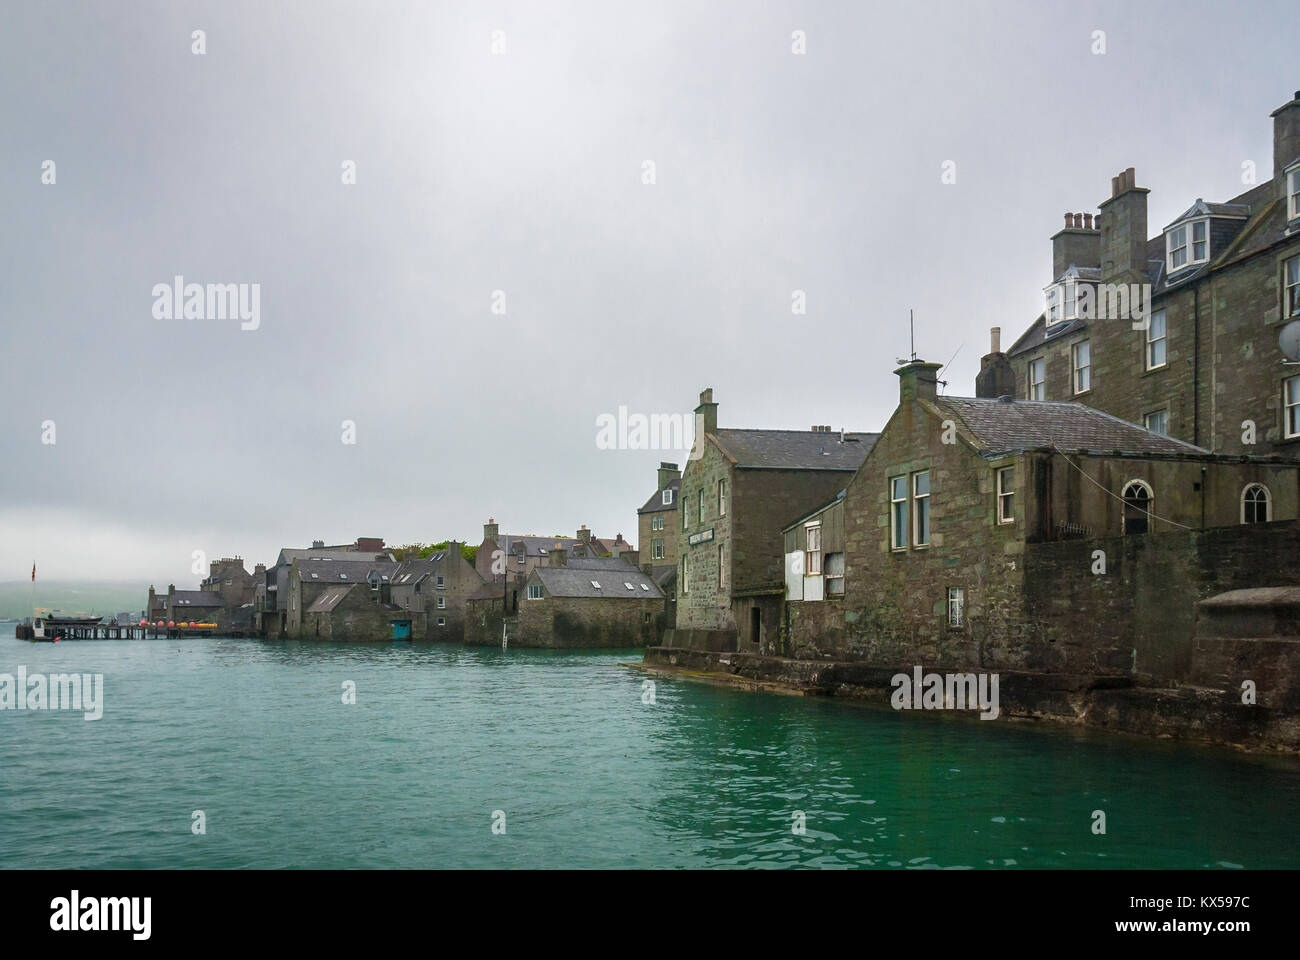 Lerwick, Shetland Islands, Scotland, UK, Europe. View of the Lodberries, 18th century waterfront warehouses with piers in the old town. 3 June 2008 Stock Photo